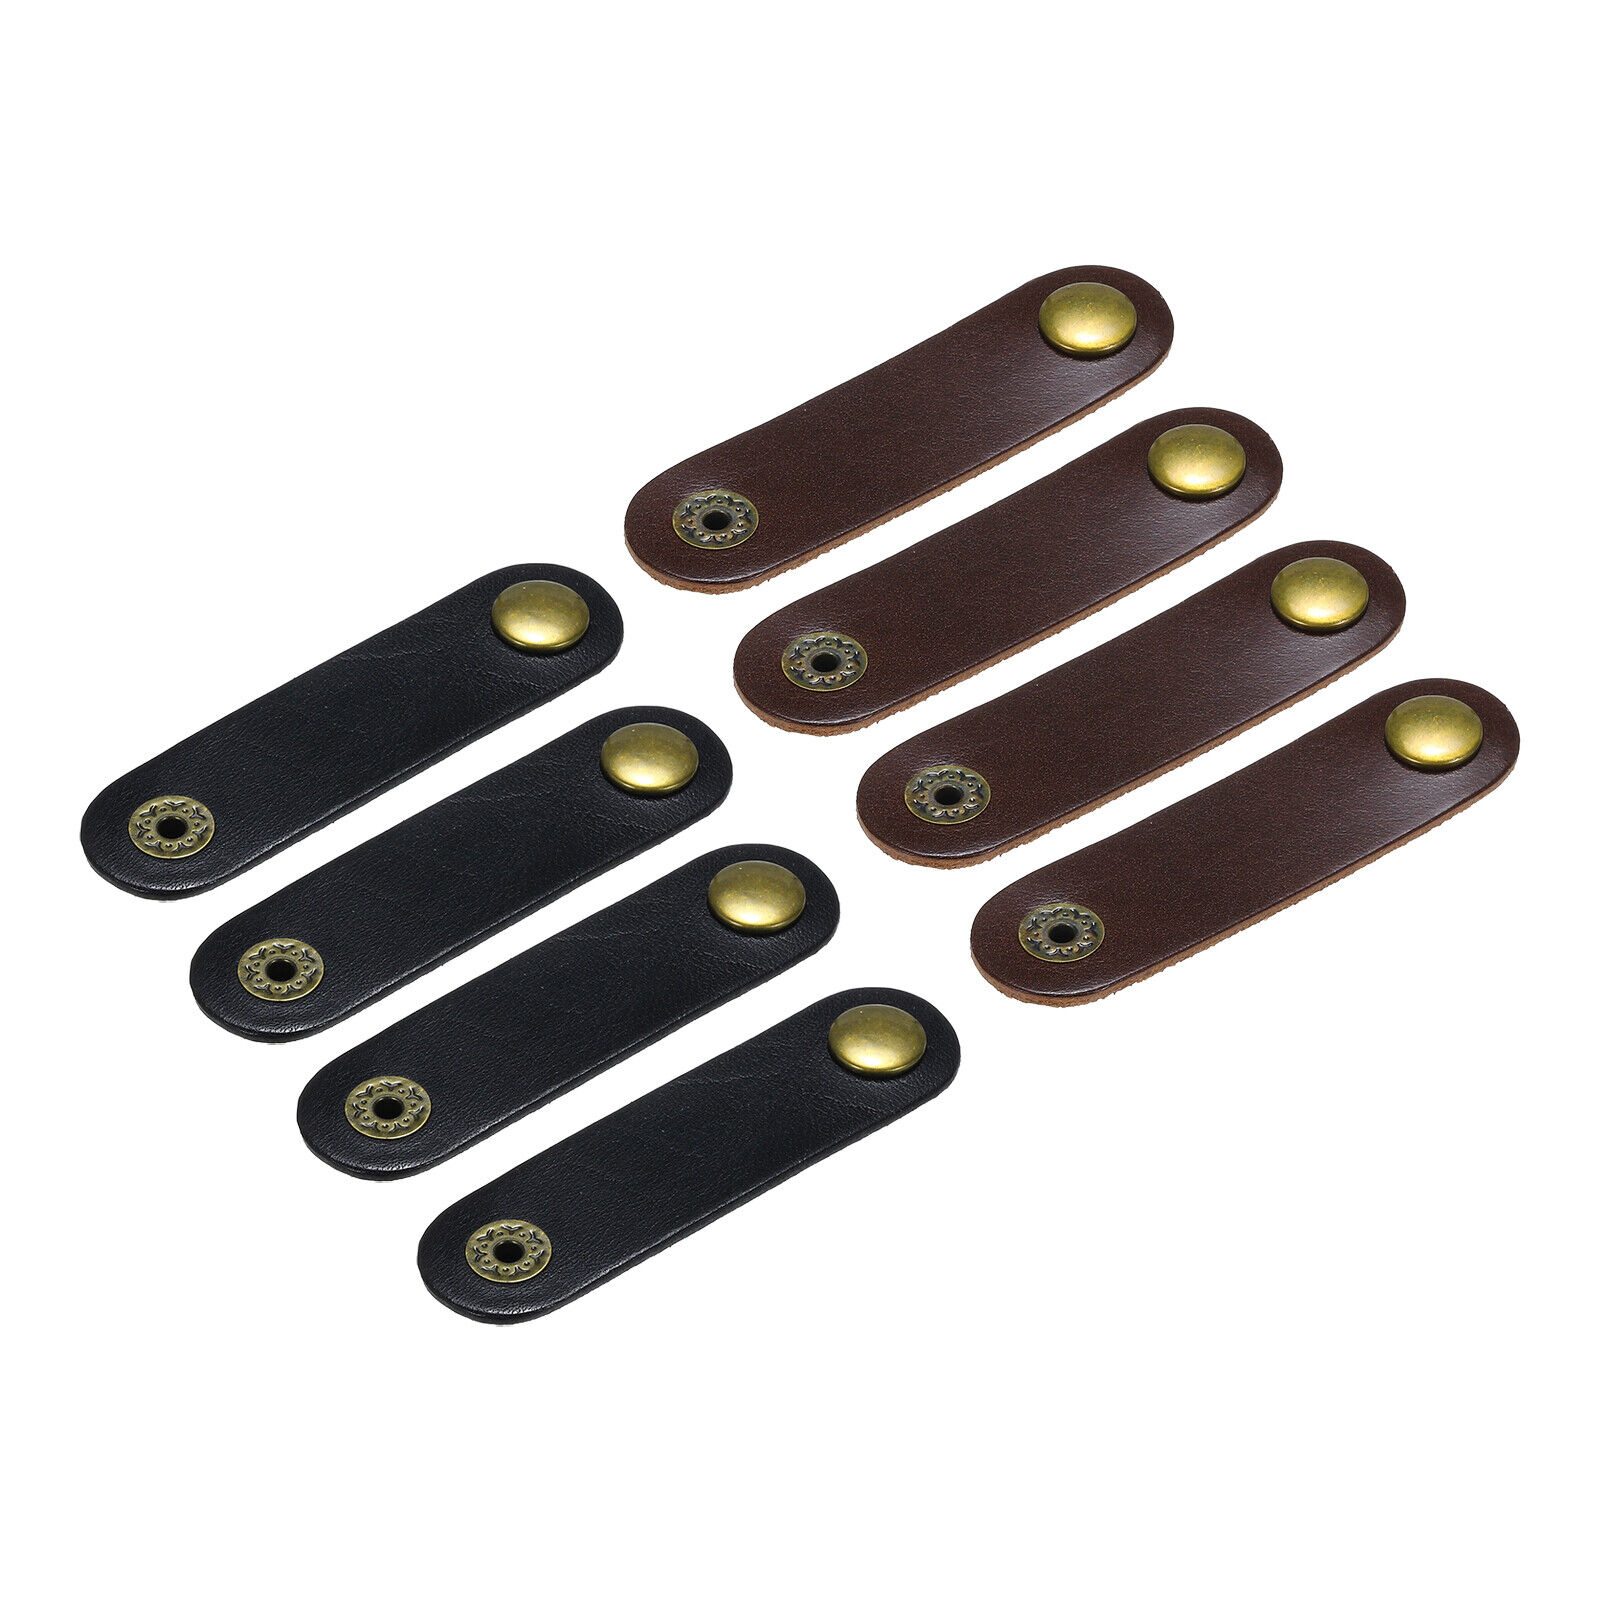 8Pcs Leather Cable Straps Cord Organizer Cable Ties Elastic Black/Coffee Color